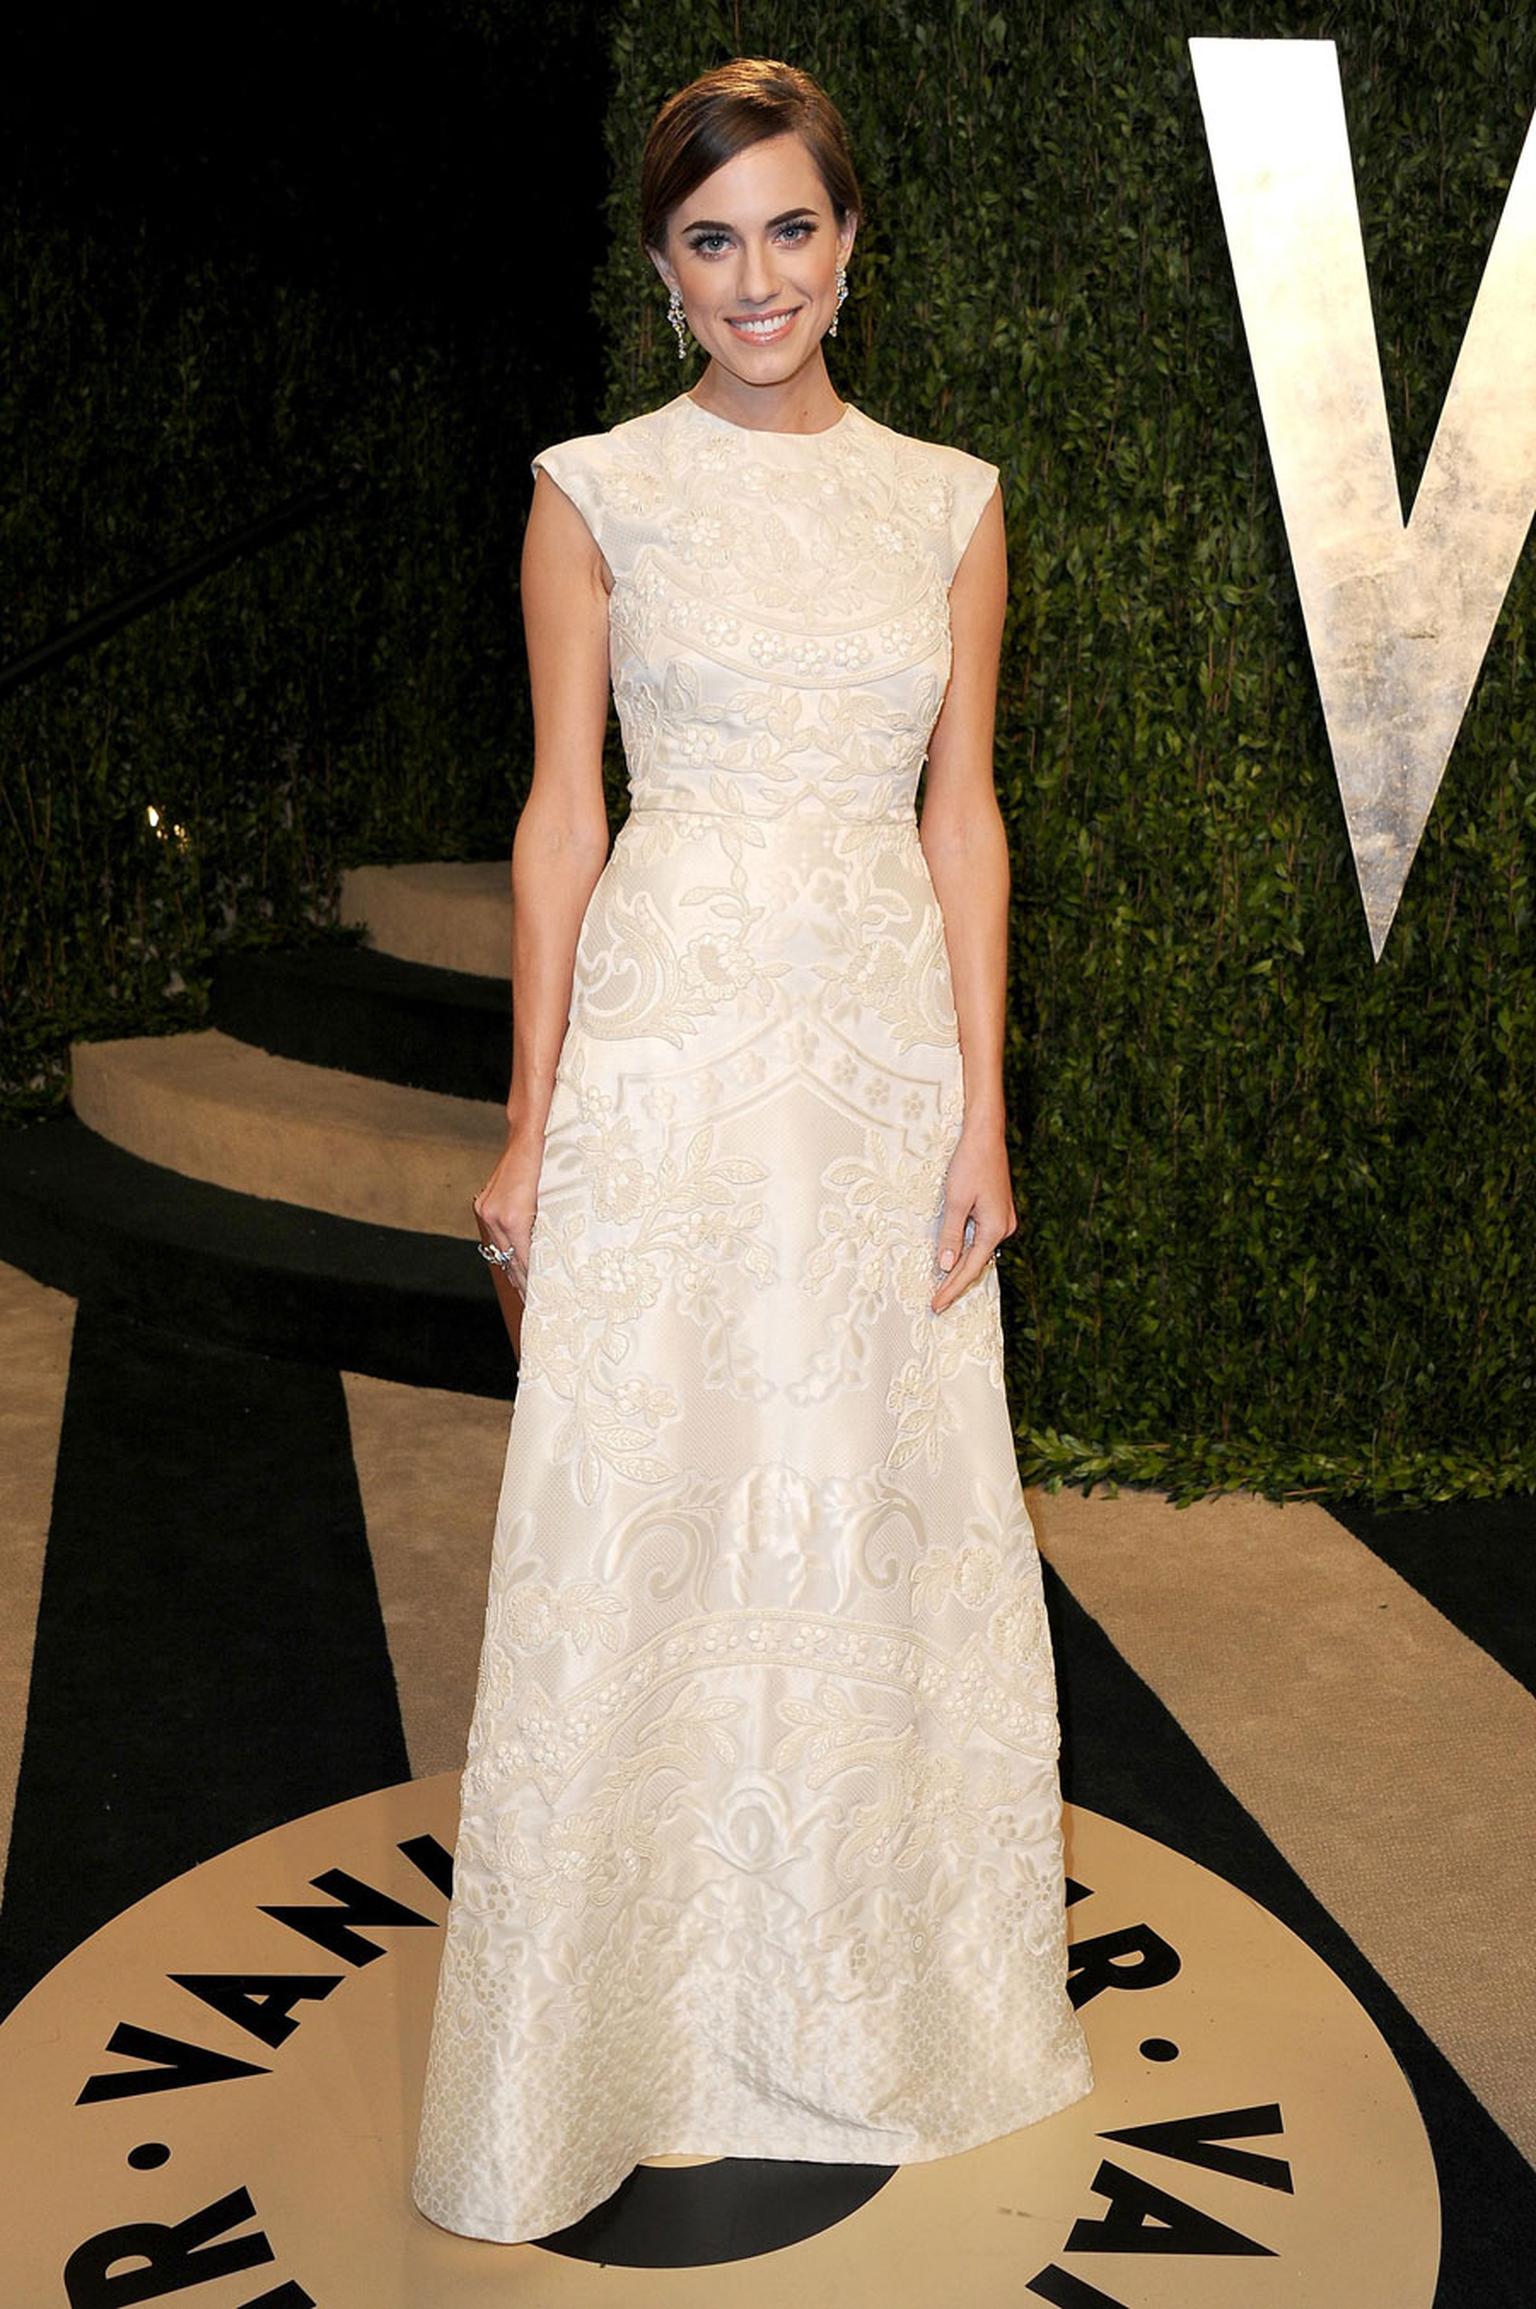 Allison-Williams---Van-Cleef-and-Arpels---Photo-by-Pascal-Le-Segretain-Getty-Images-162607403.jpg